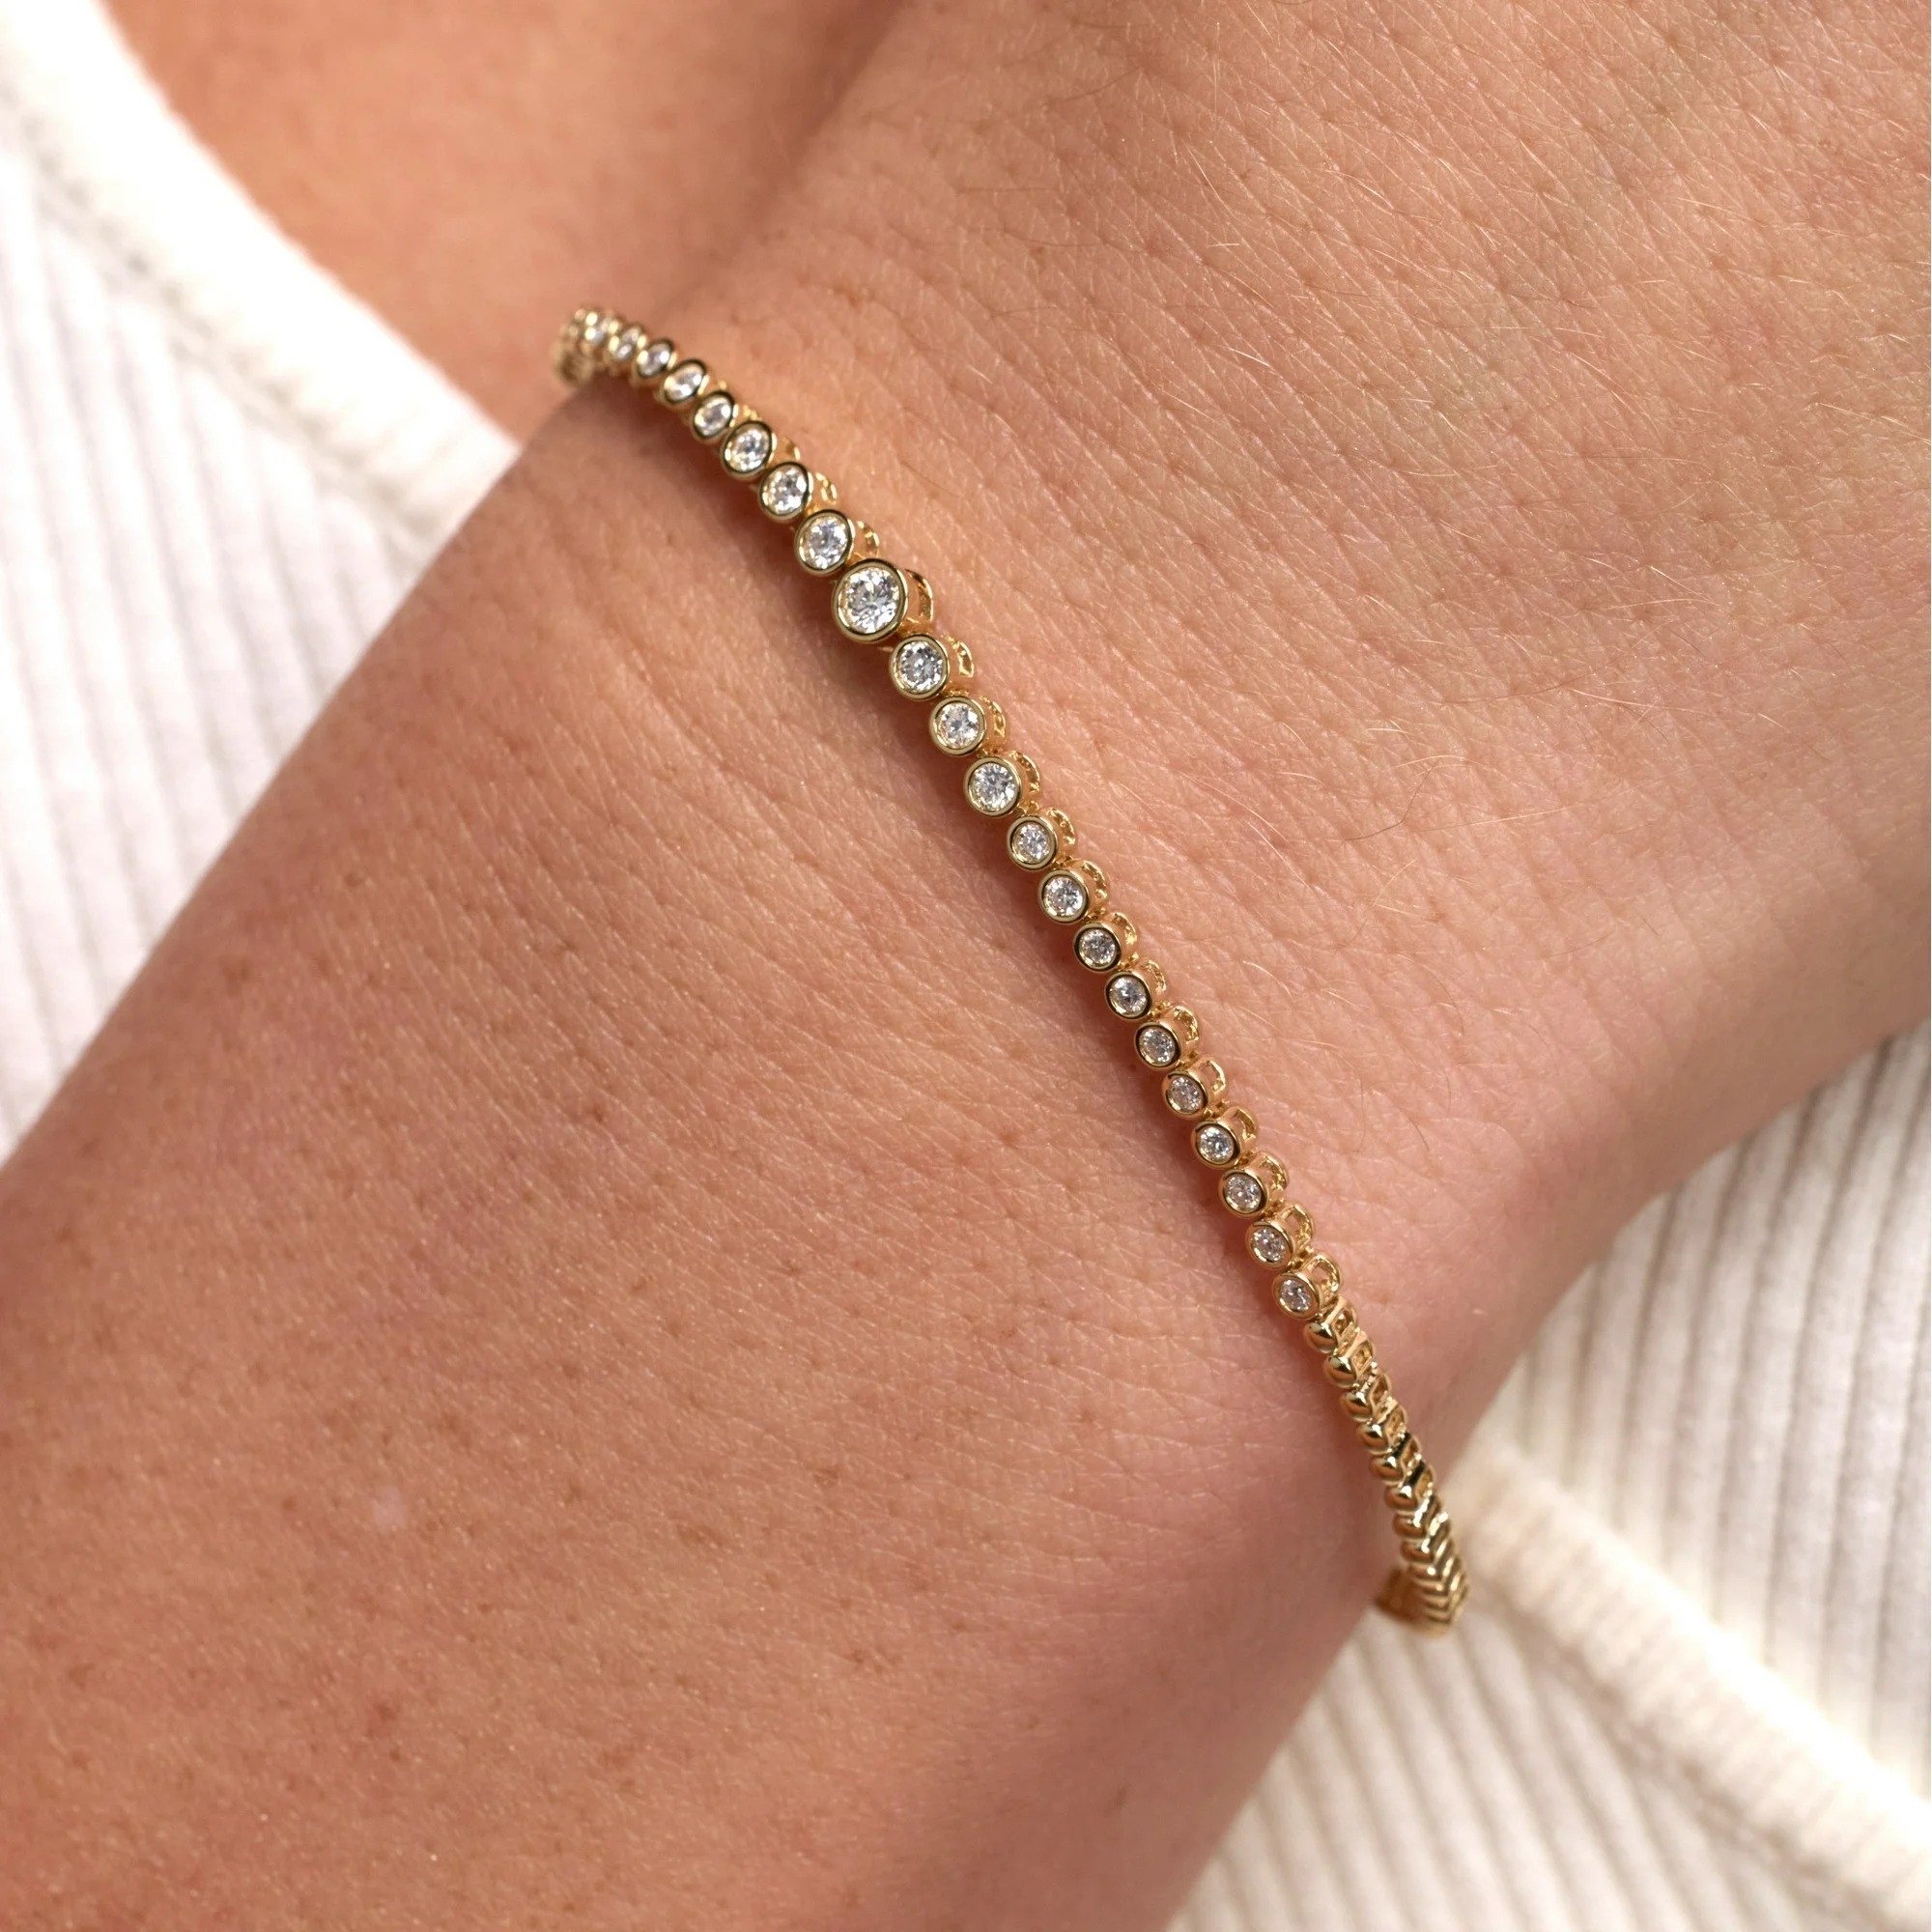 Wrist adorned with a delicate gold tennis bracelet featuring a single row of clear, round diamonds